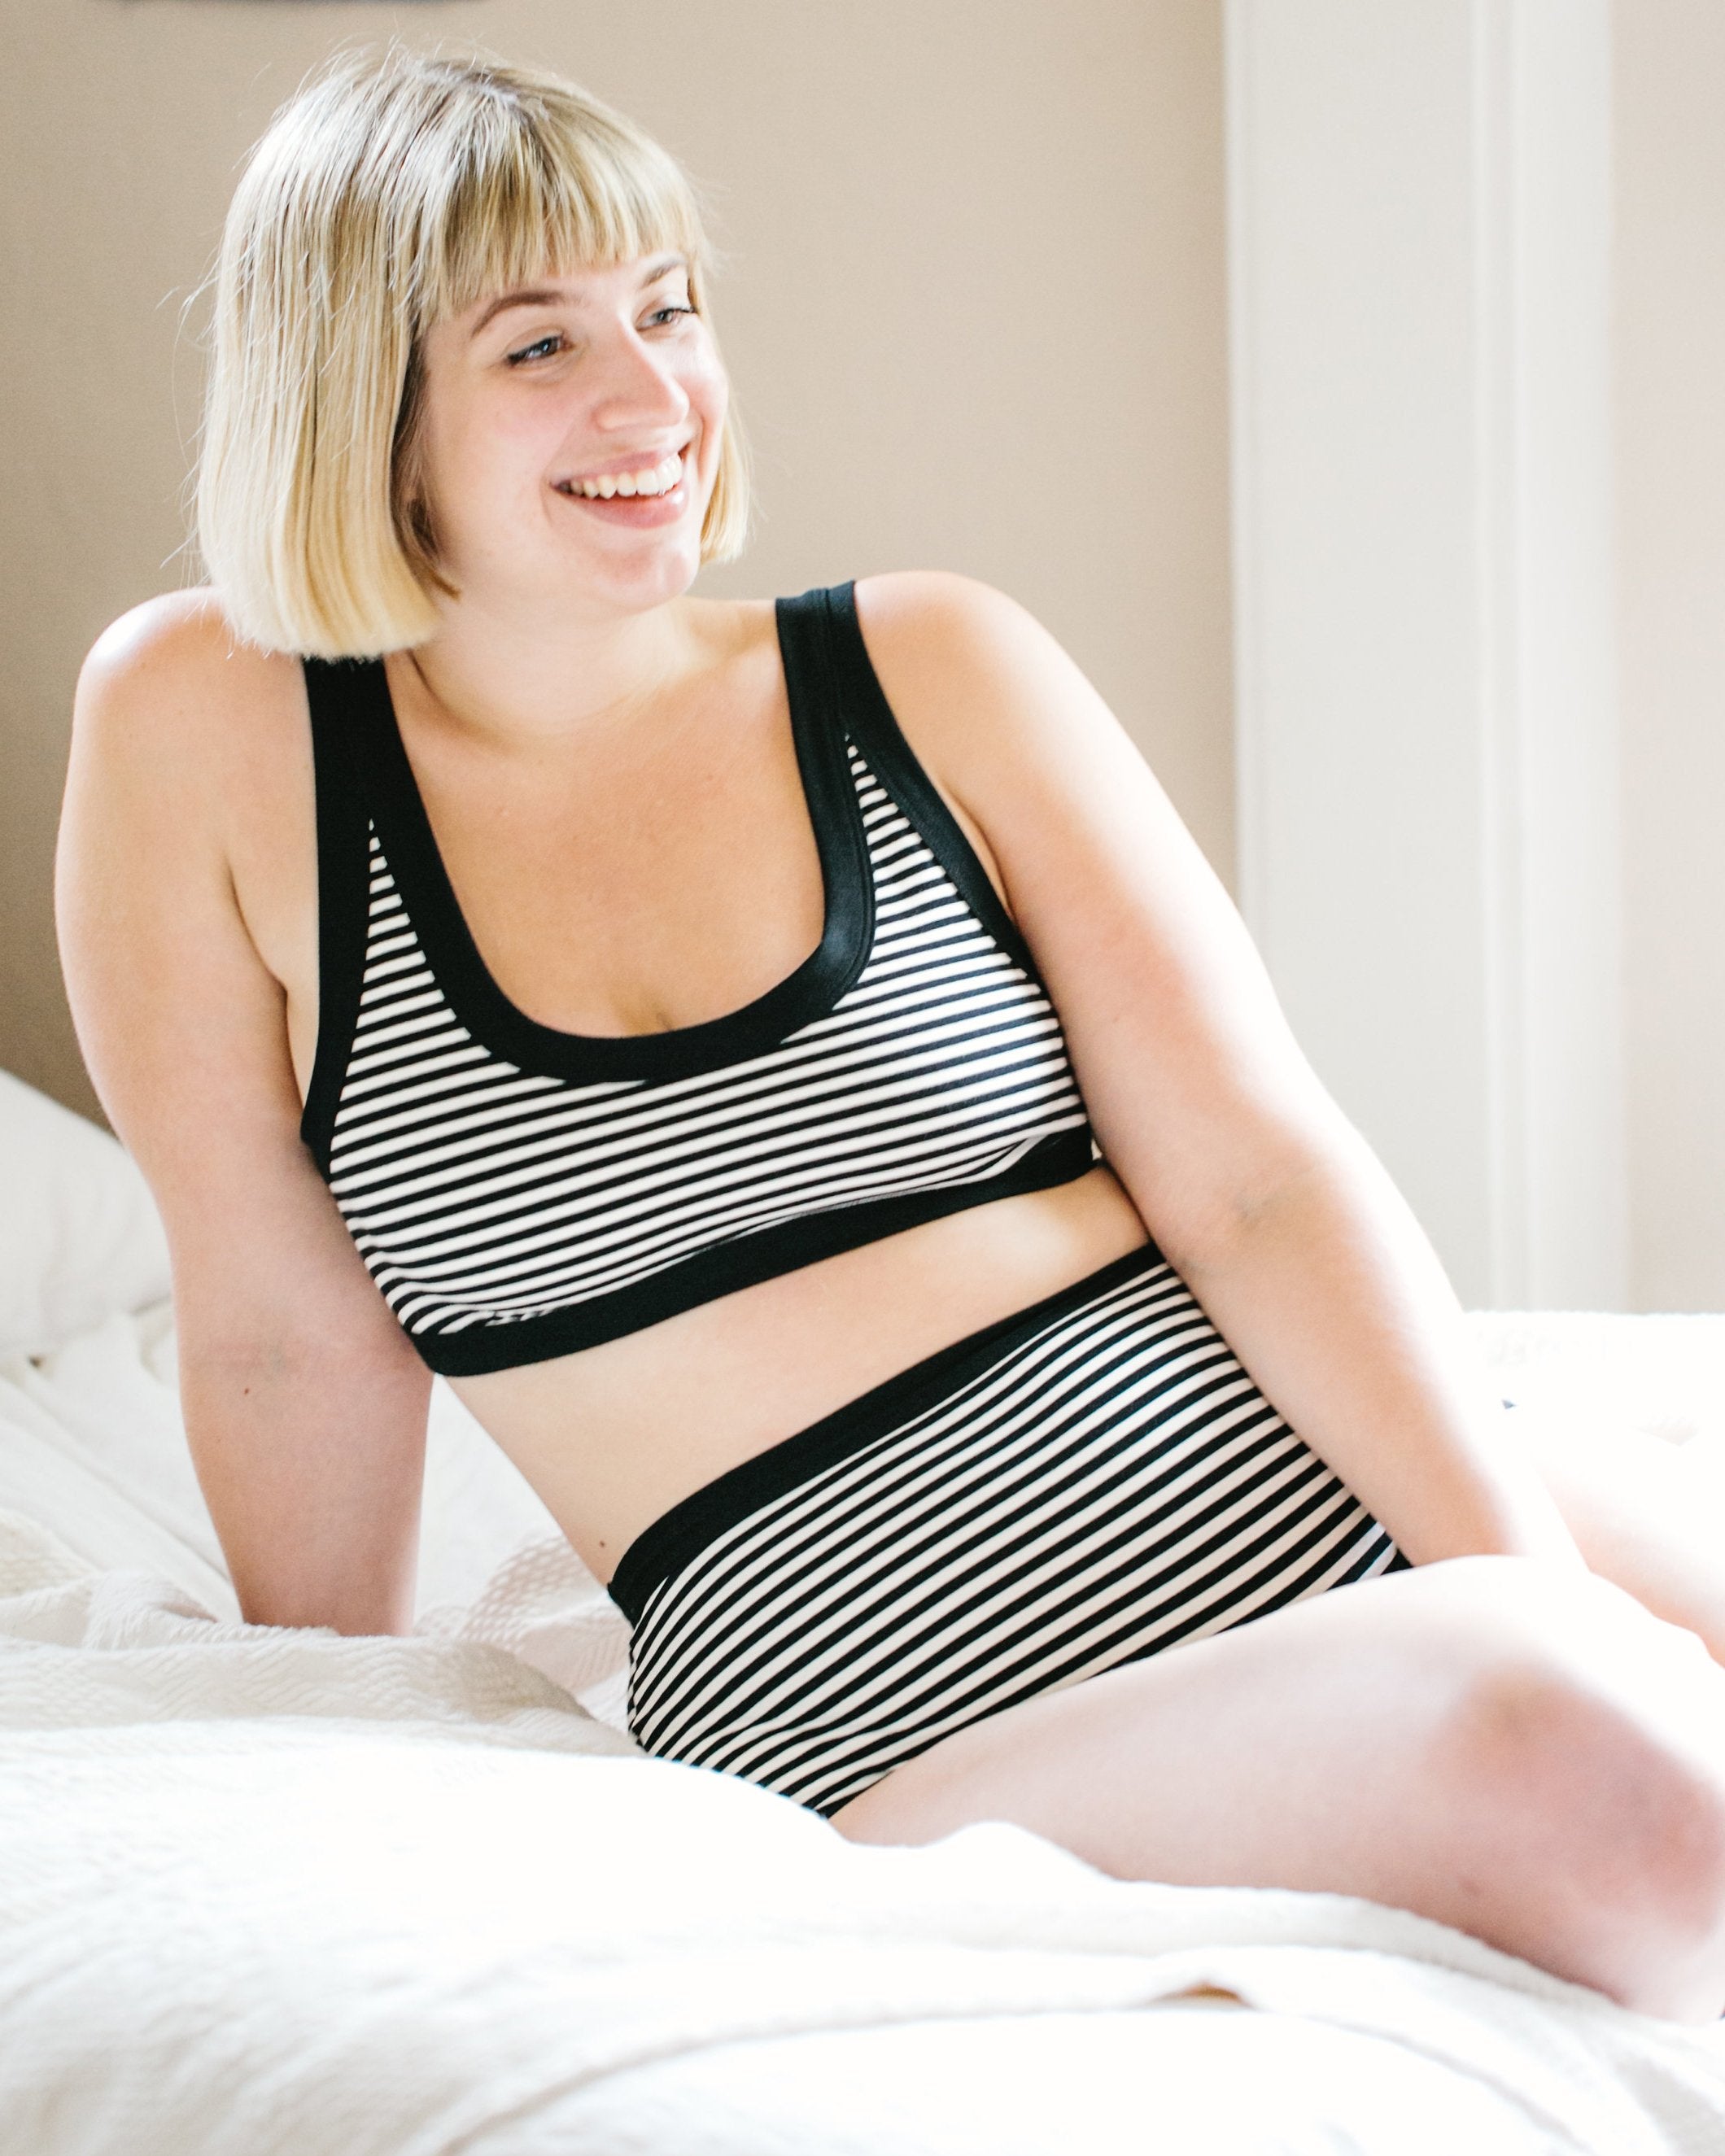 Model happily lounging on a bed wearing Thunderpants organic cotton Bralette and Original style underwear in black and white stripes.